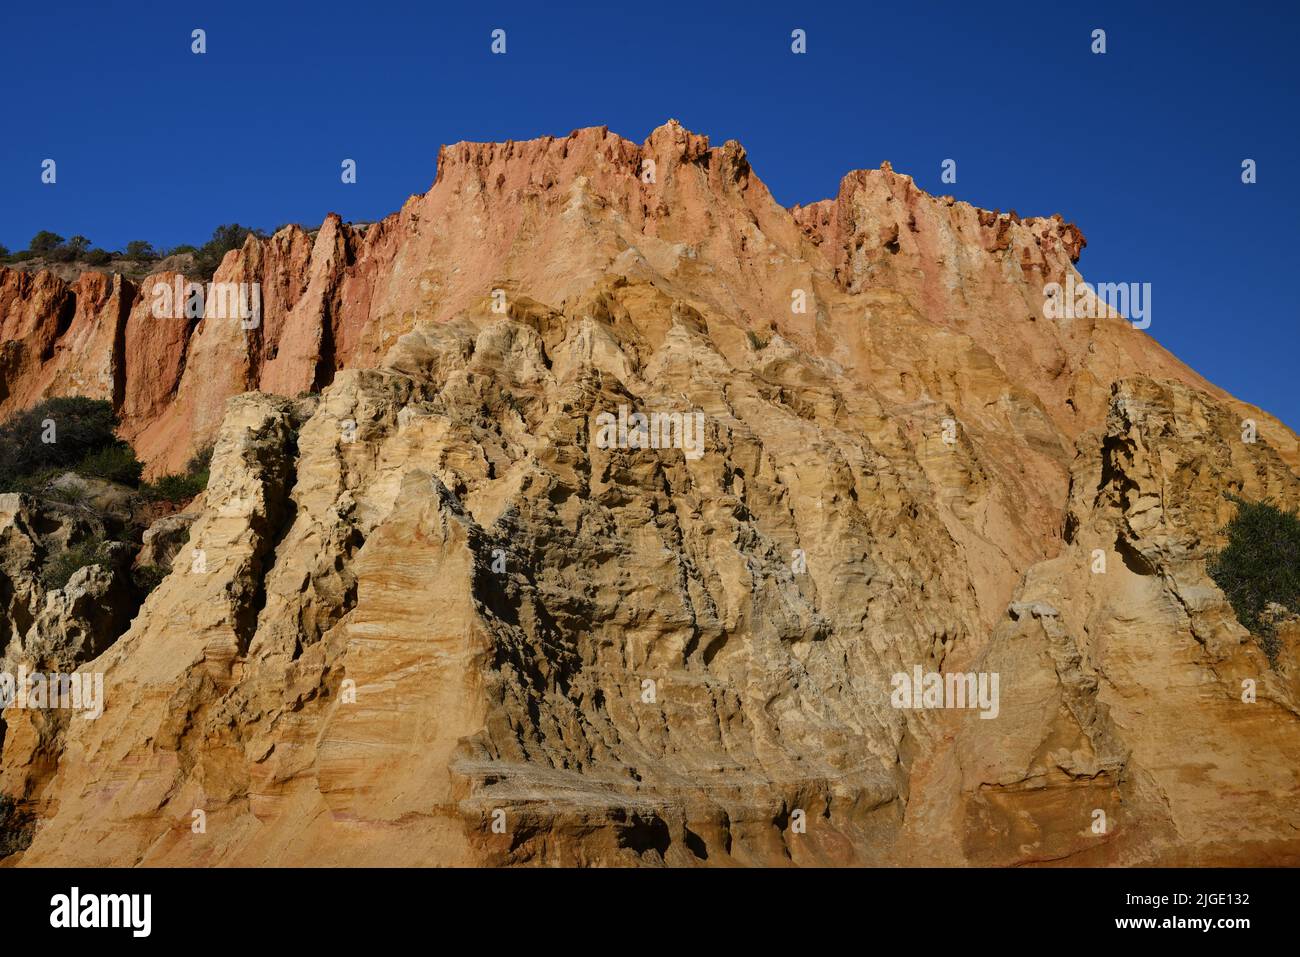 View of the rugged reddish sandstone cliff face at Red Bluff, with blue sky in the background Stock Photo